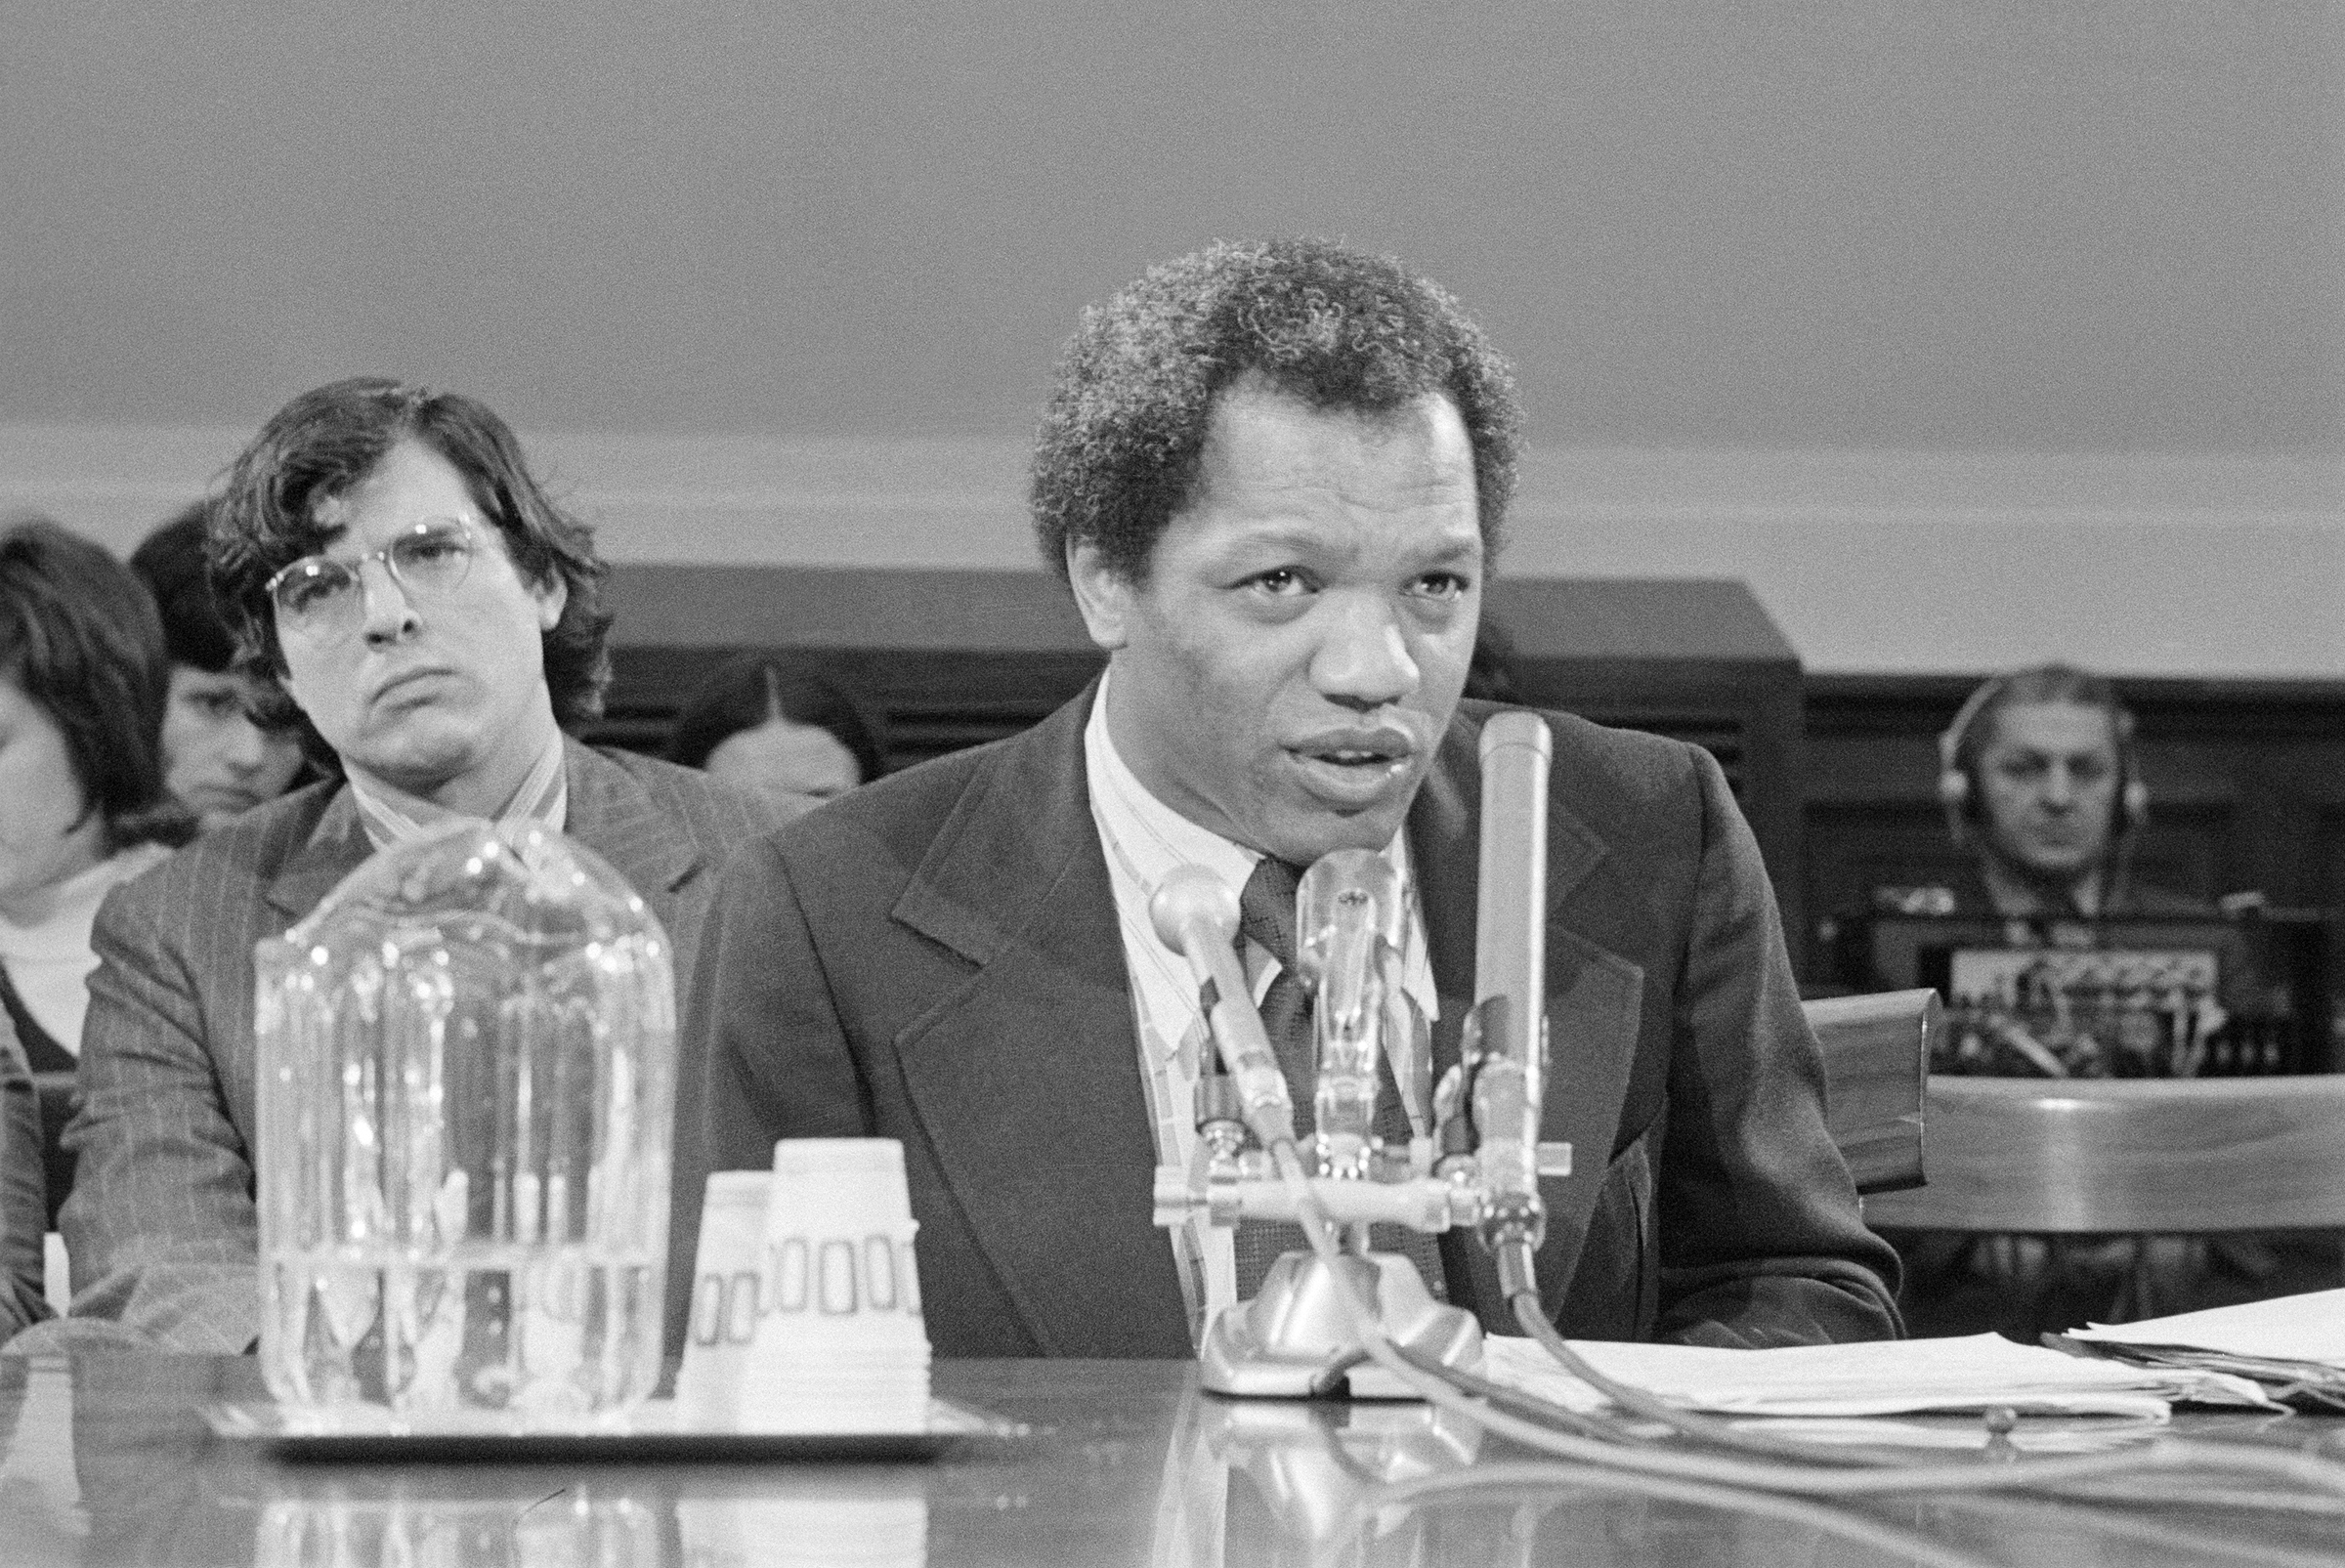 Caldwell on Feb. 5, 1973 is shown testifying before a House Judiciary subcommittee that constitutional guarantees of a free press were gravely damaged by a Supreme Court ruling and that reporters may be required to reveal certain information gained in confidence. (Bettmann Archive/Getty Images)